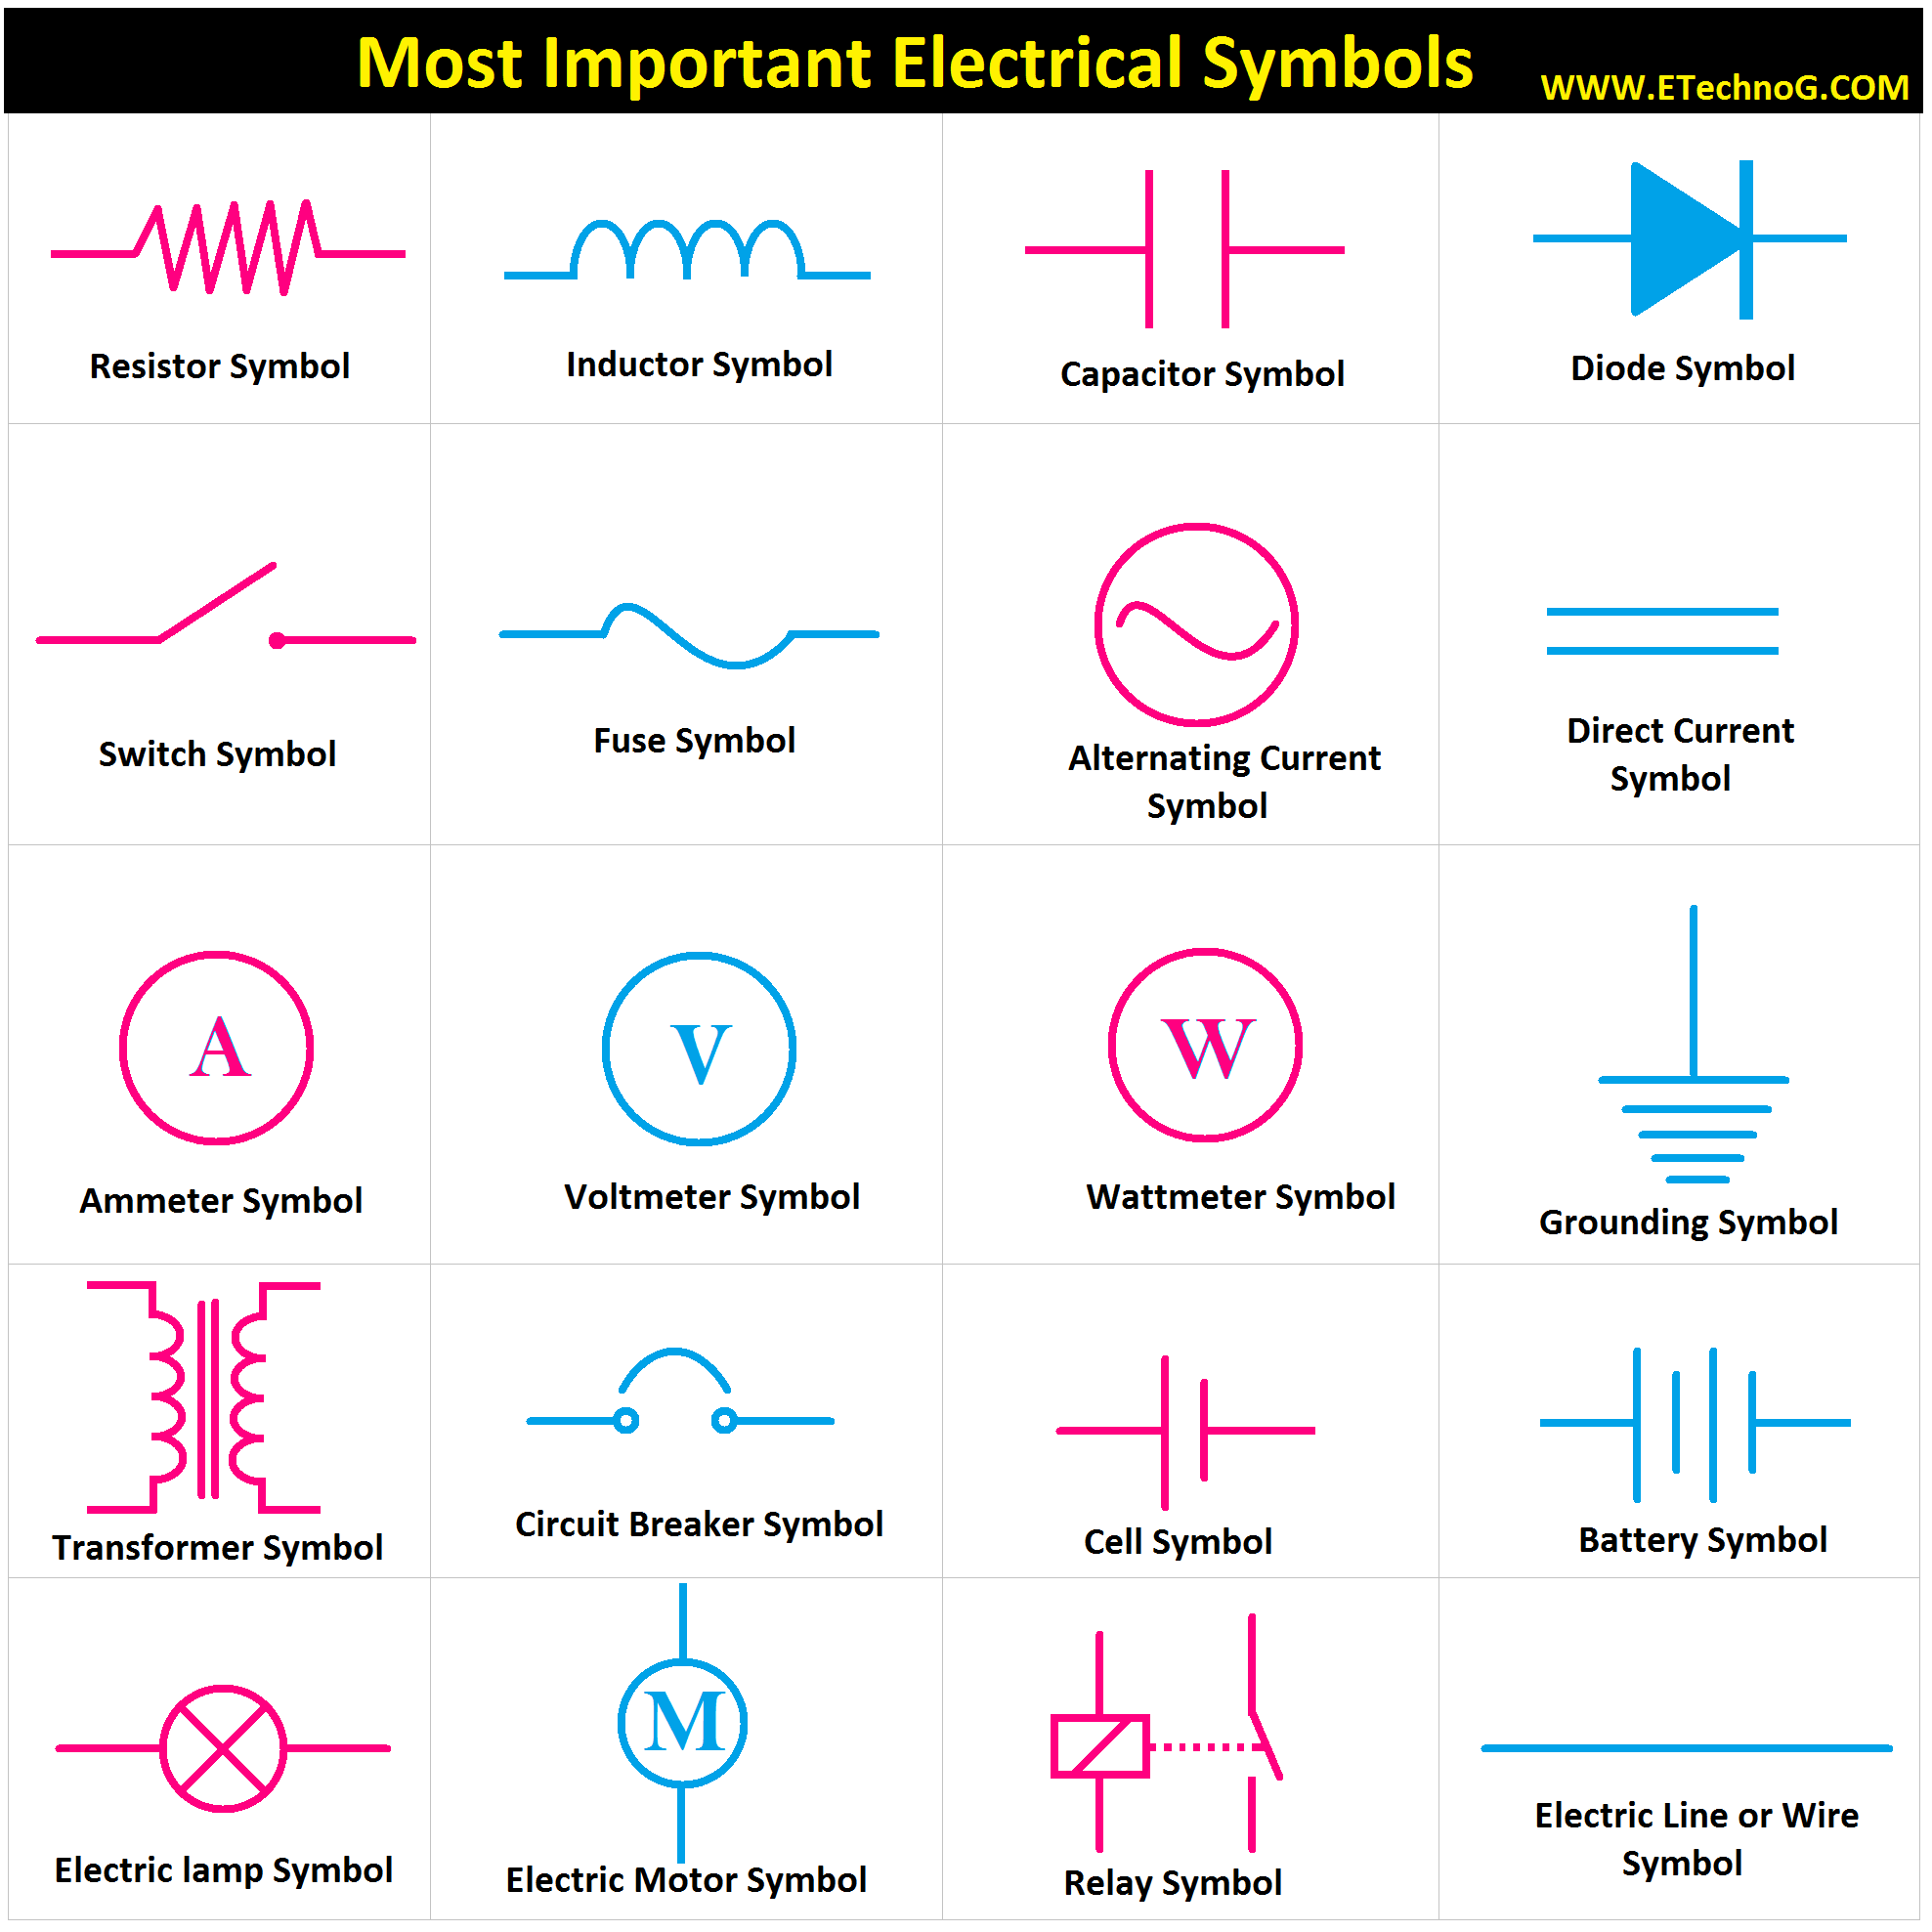 Most Important Electrical Symbols and Diagrams - ETechnoG